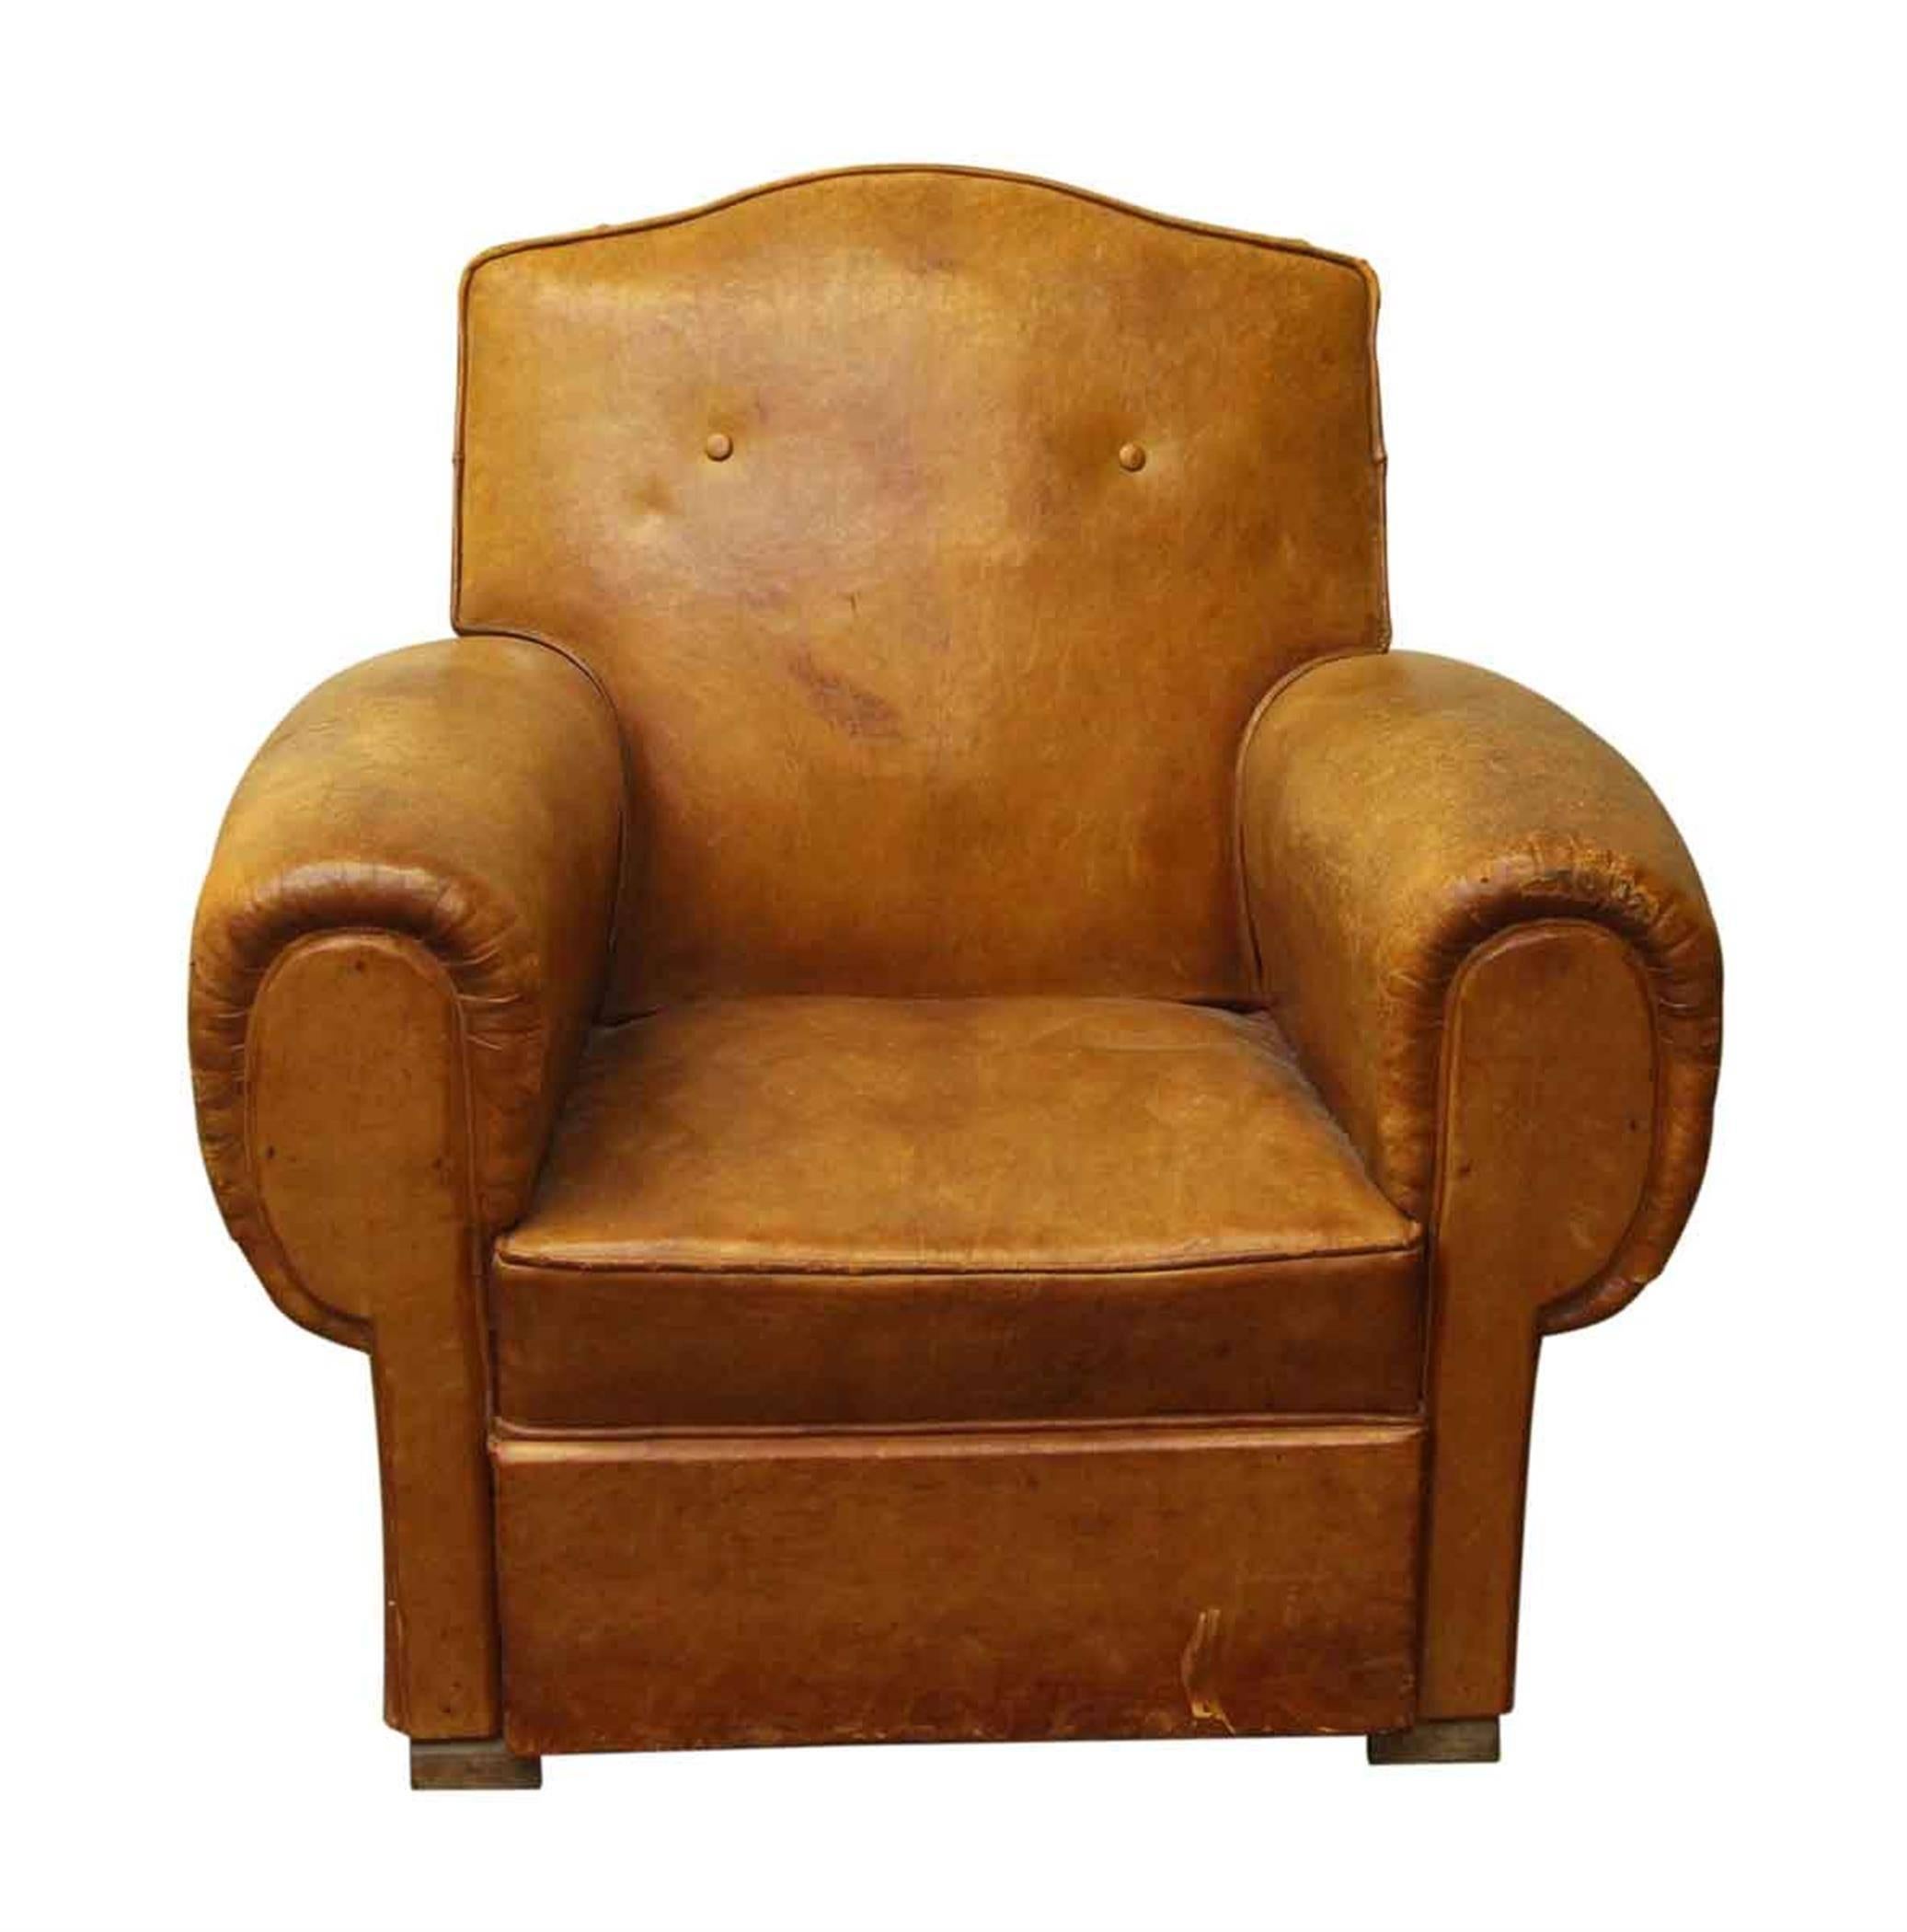 1960s single French leather club chair with a studded back. Shows wear from age and use. This can be seen at our 400 Gilligan St location in Scranton, PA.